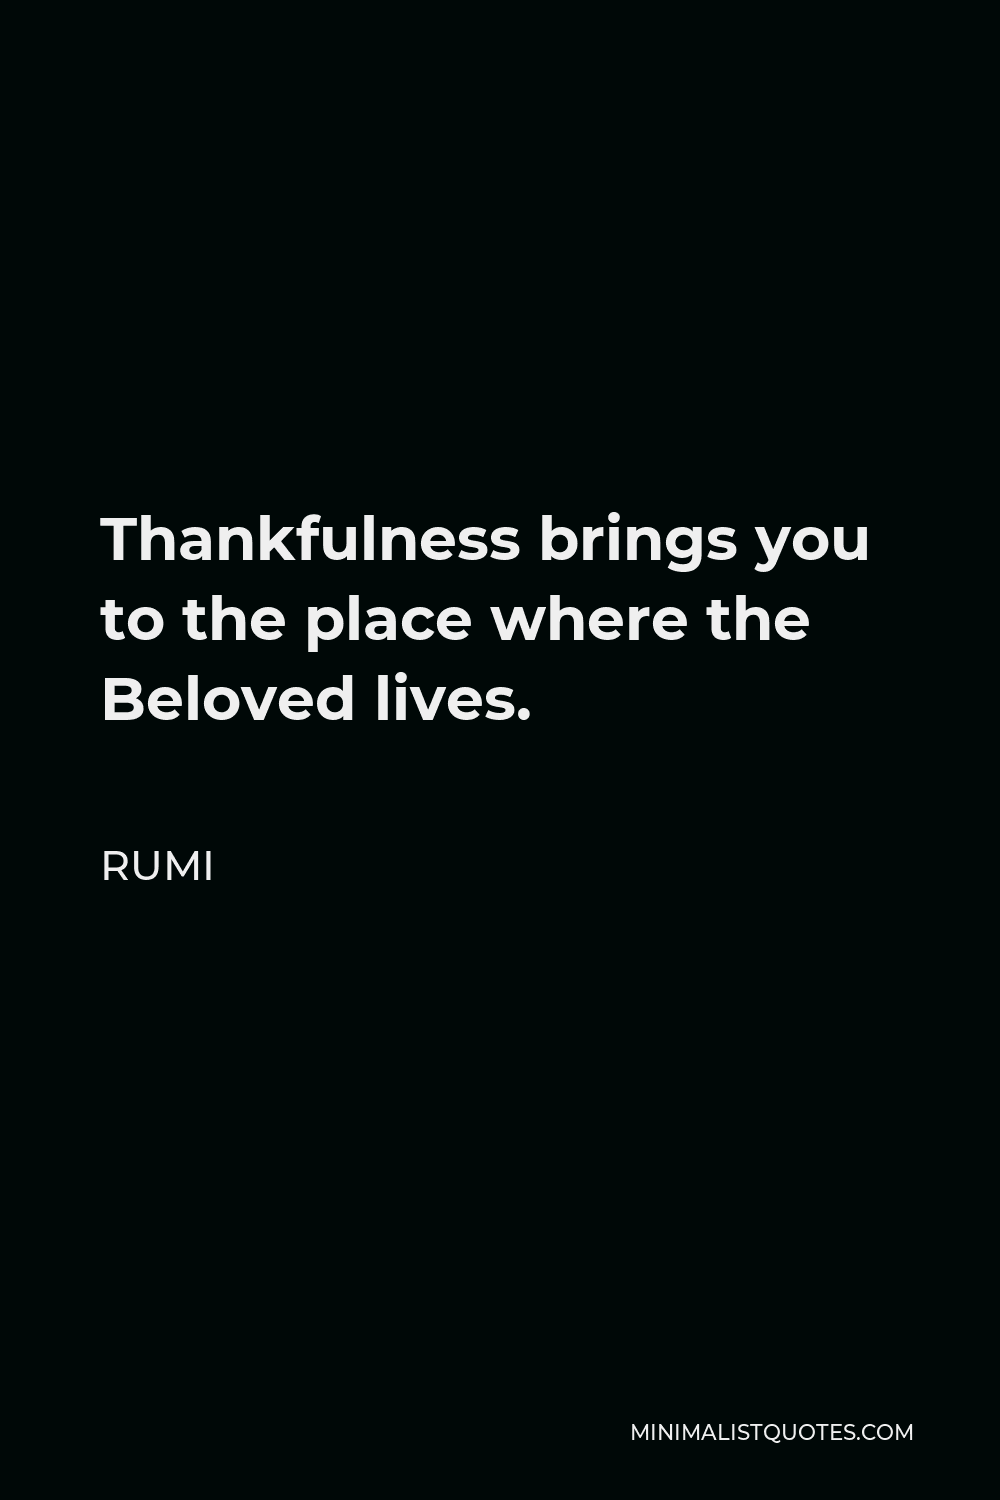 Rumi Quote - Thankfulness brings you to the place where the Beloved lives.